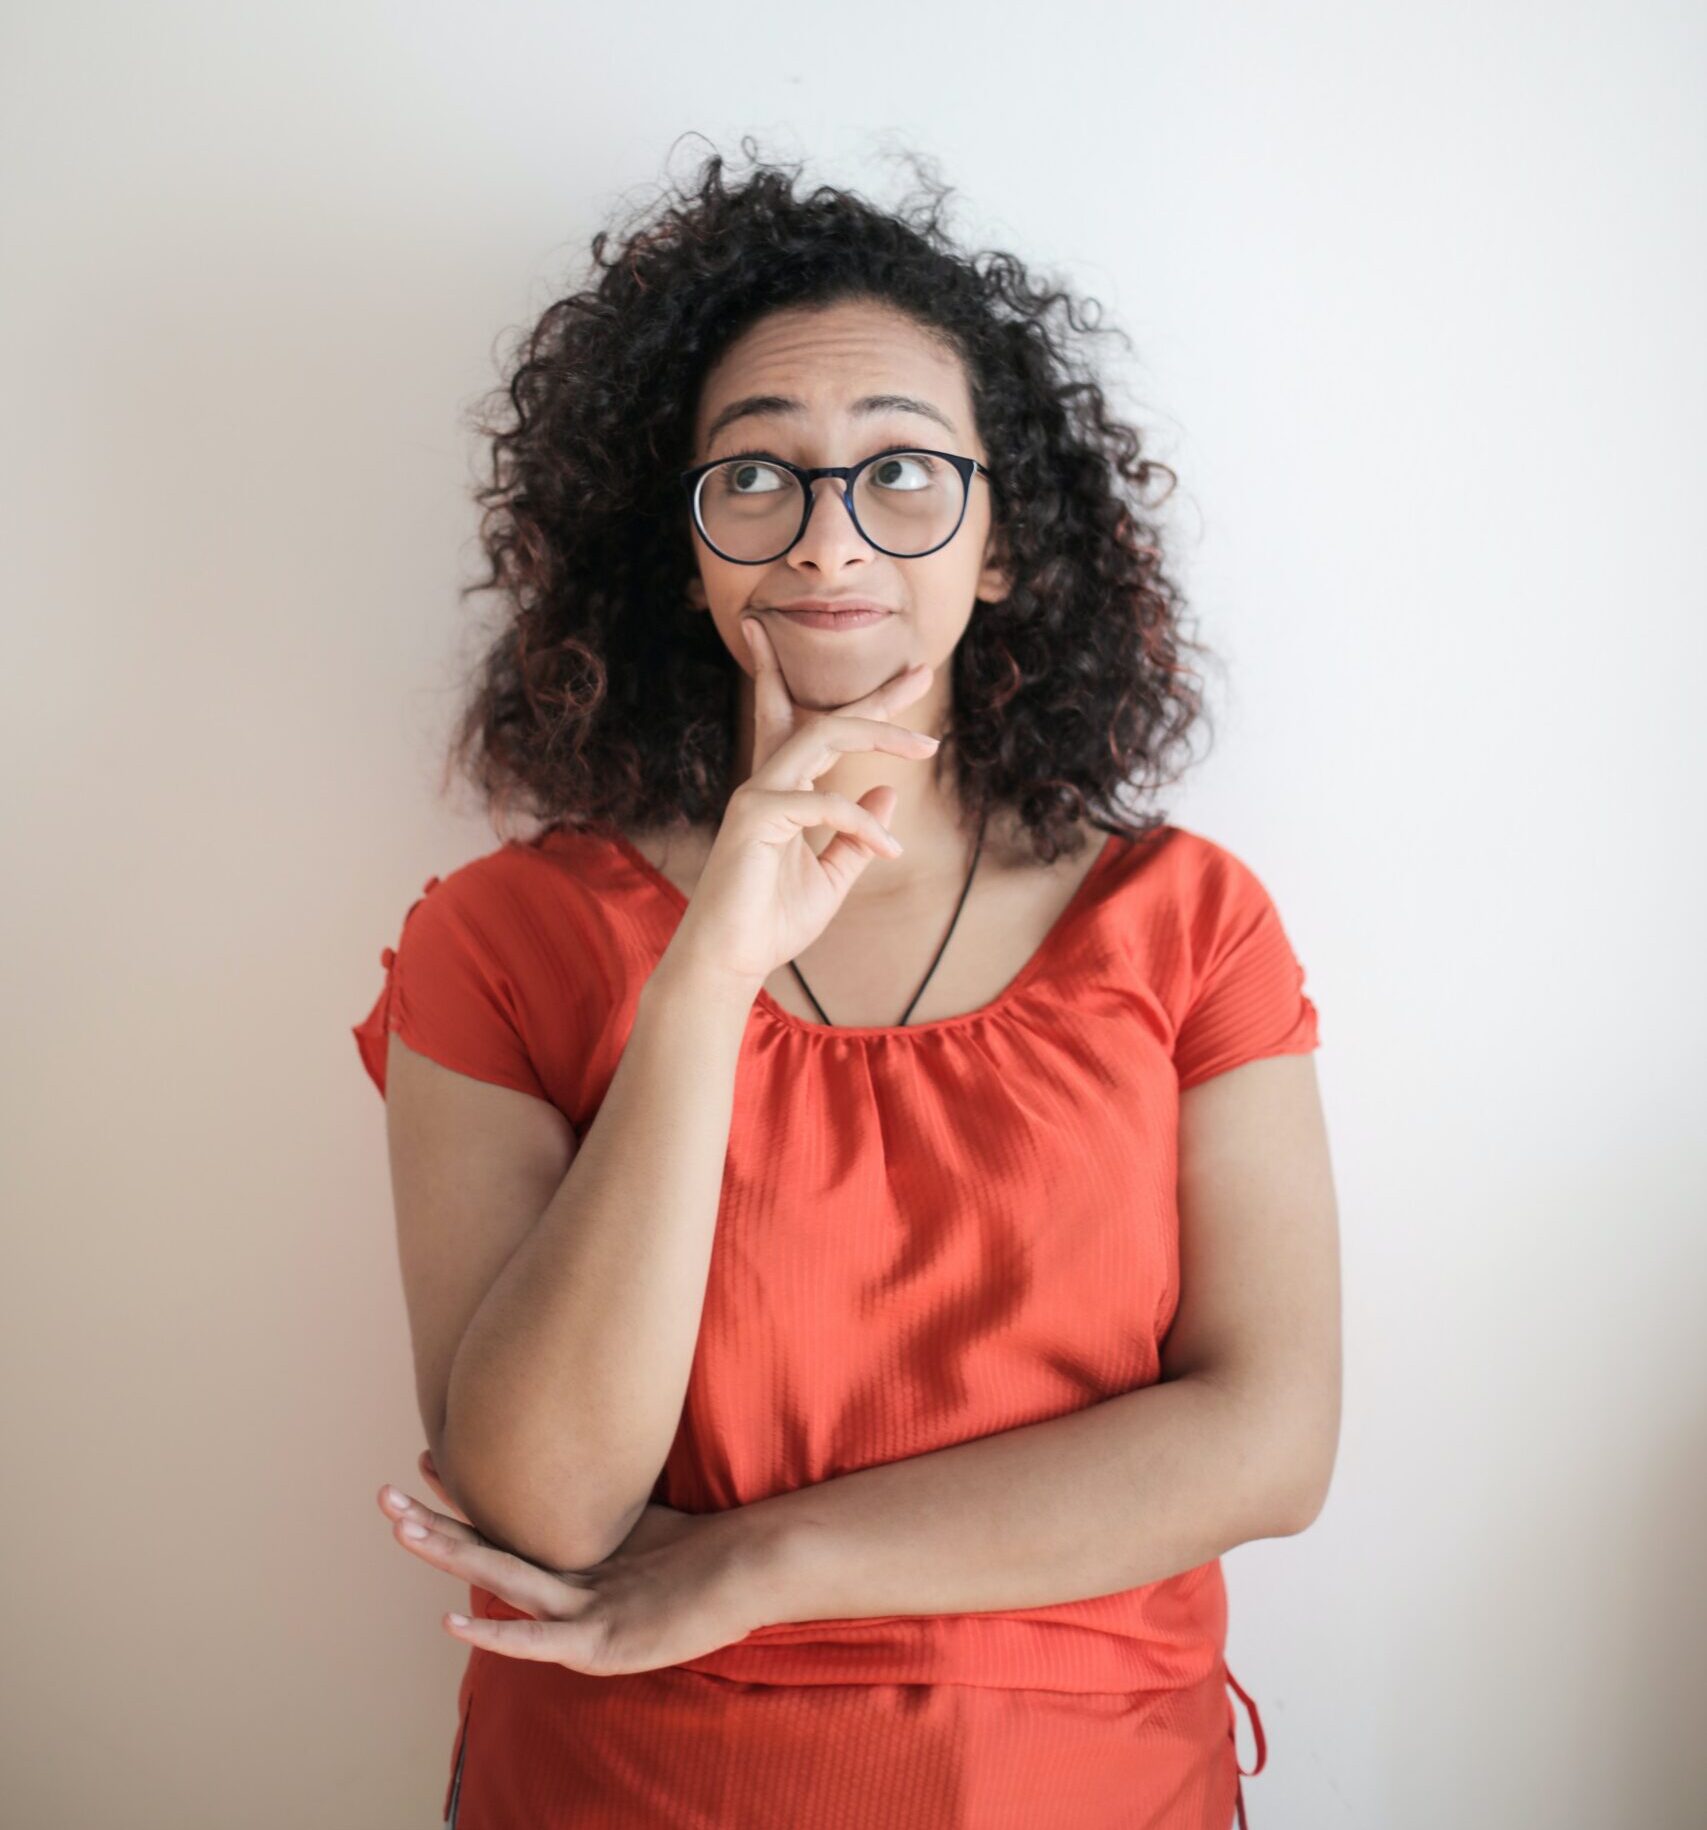 woman with curly hair and glasses looking contemplative